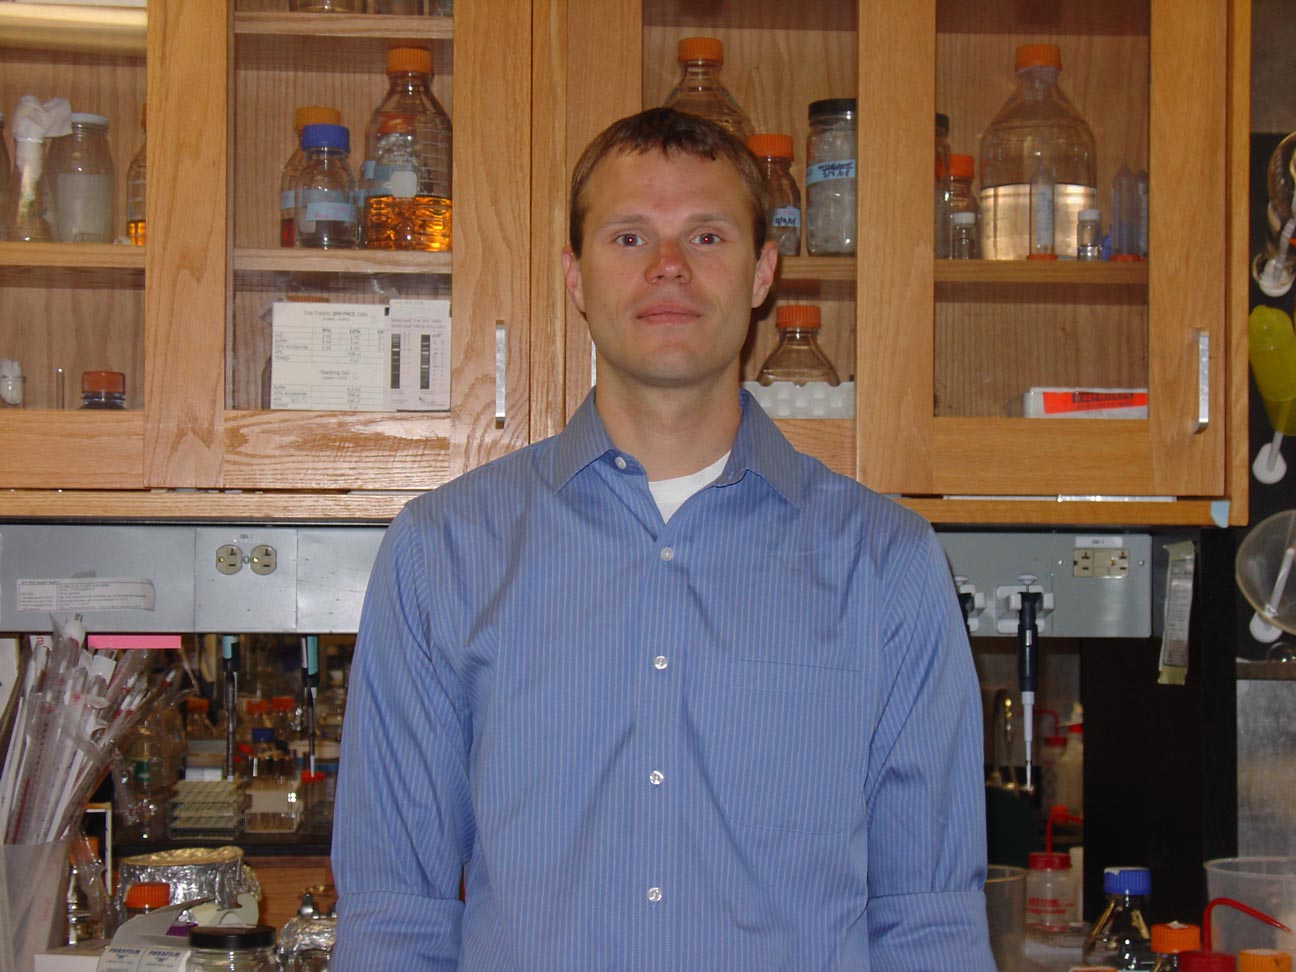 Picture of Prof. Olsen in front of a lab bench.